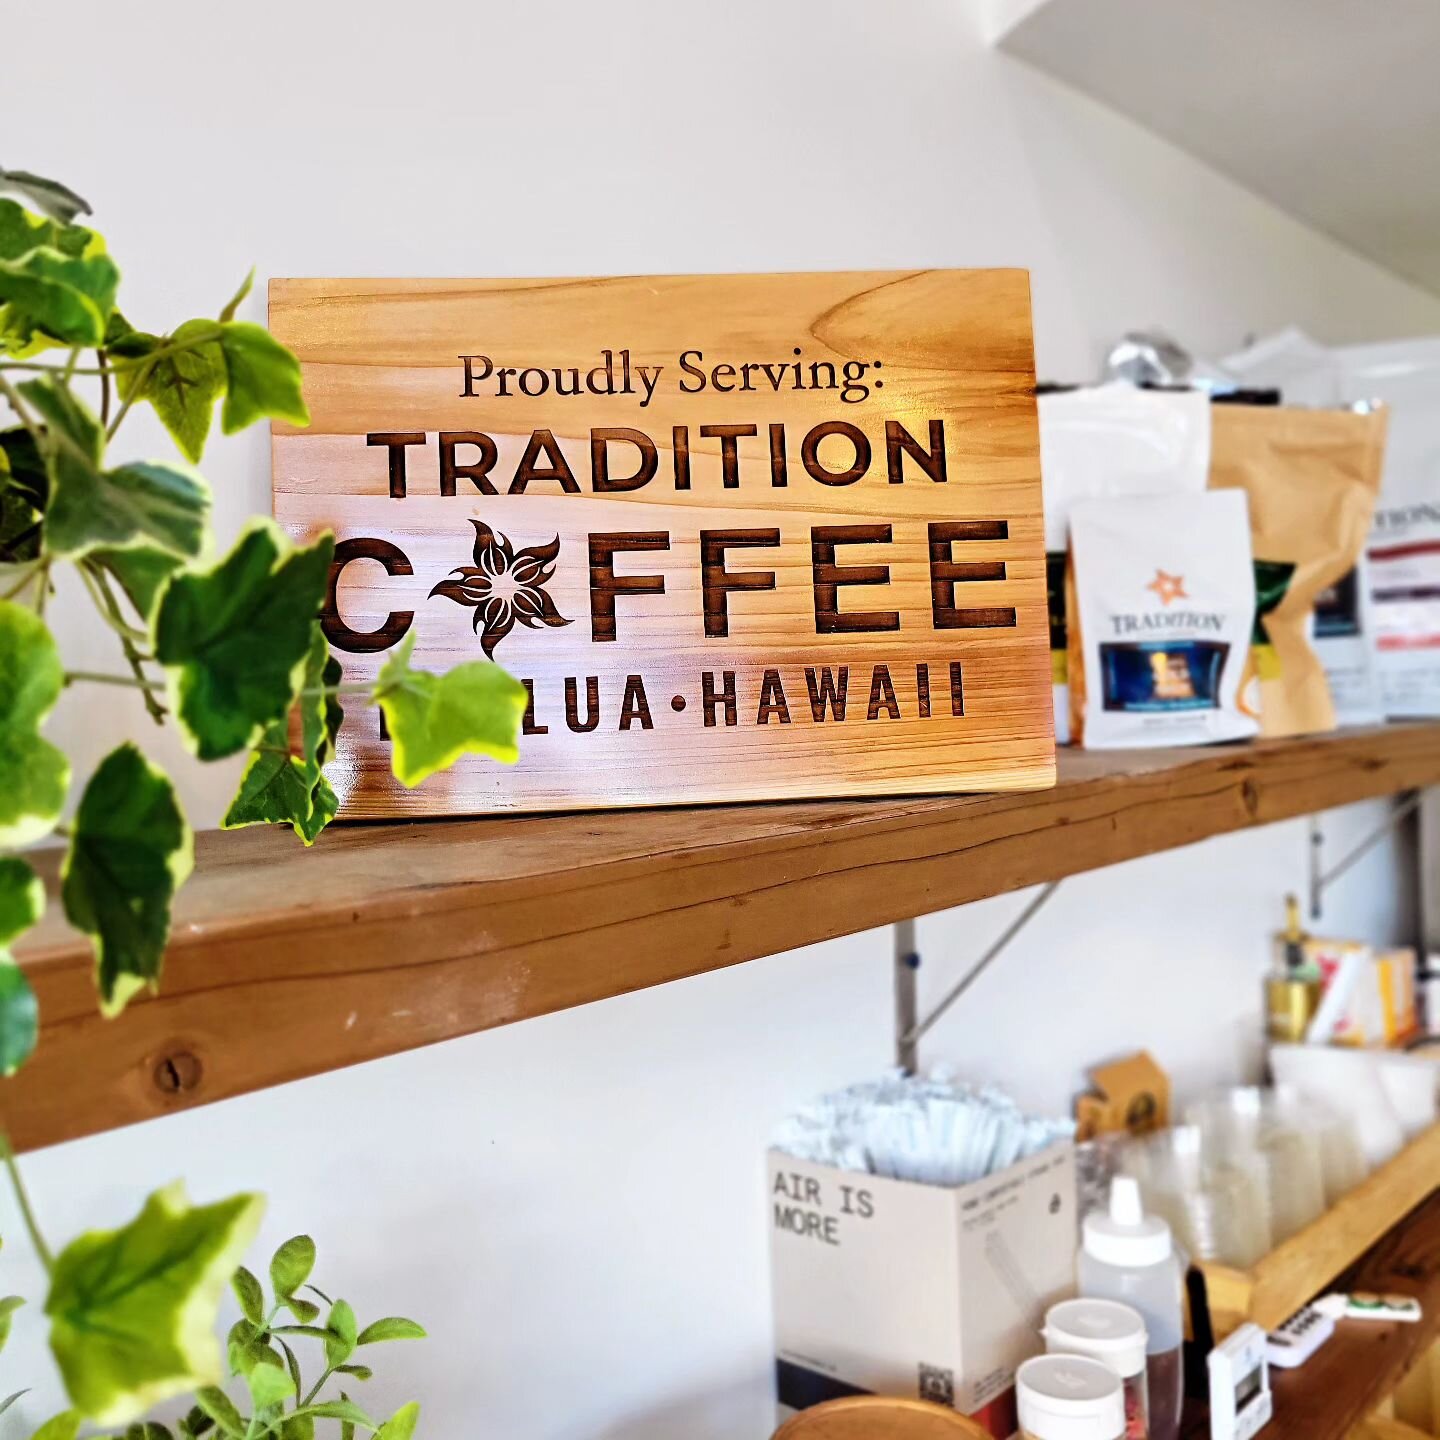 Why do we love @traditioncoffeeroasters ❓️

🫘 Family owned &amp; loved, locally roasted in Kailua
🫘 Supporting our farmers who utilize organic and sustainable methods to protect our environment.
🫘Beans are meticulously chosen based on their qualit